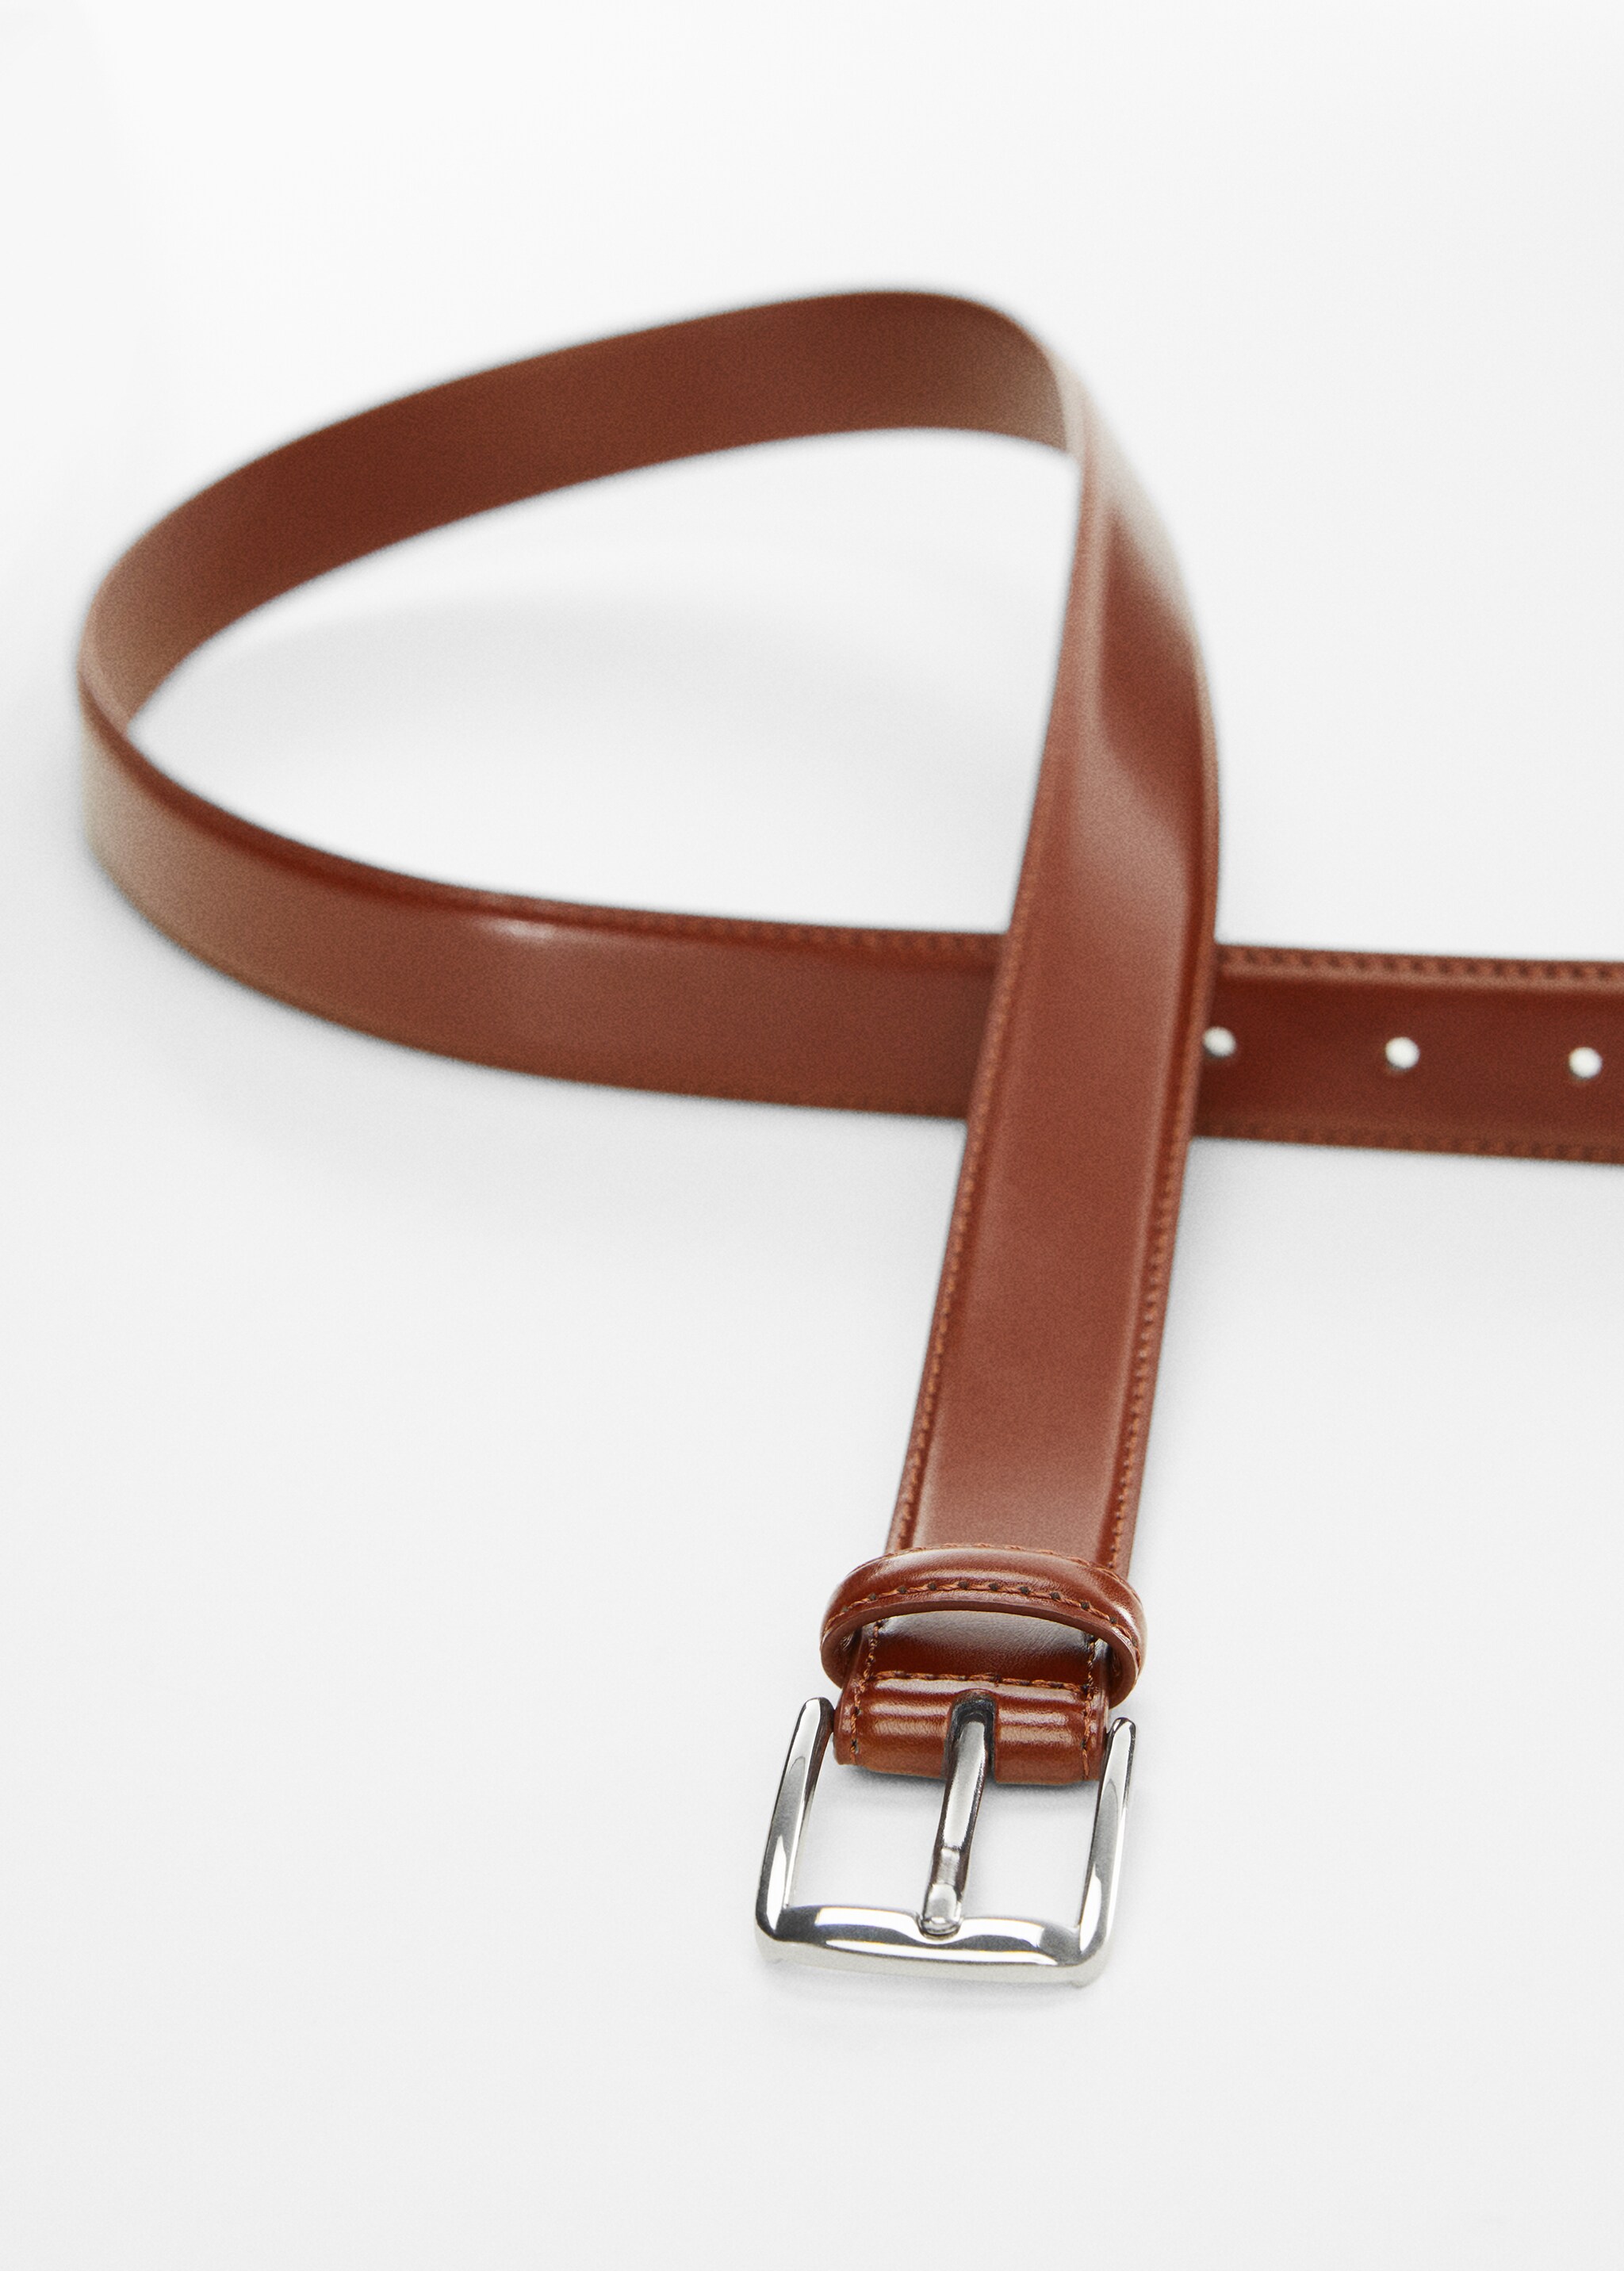 Leather belt - Details of the article 2